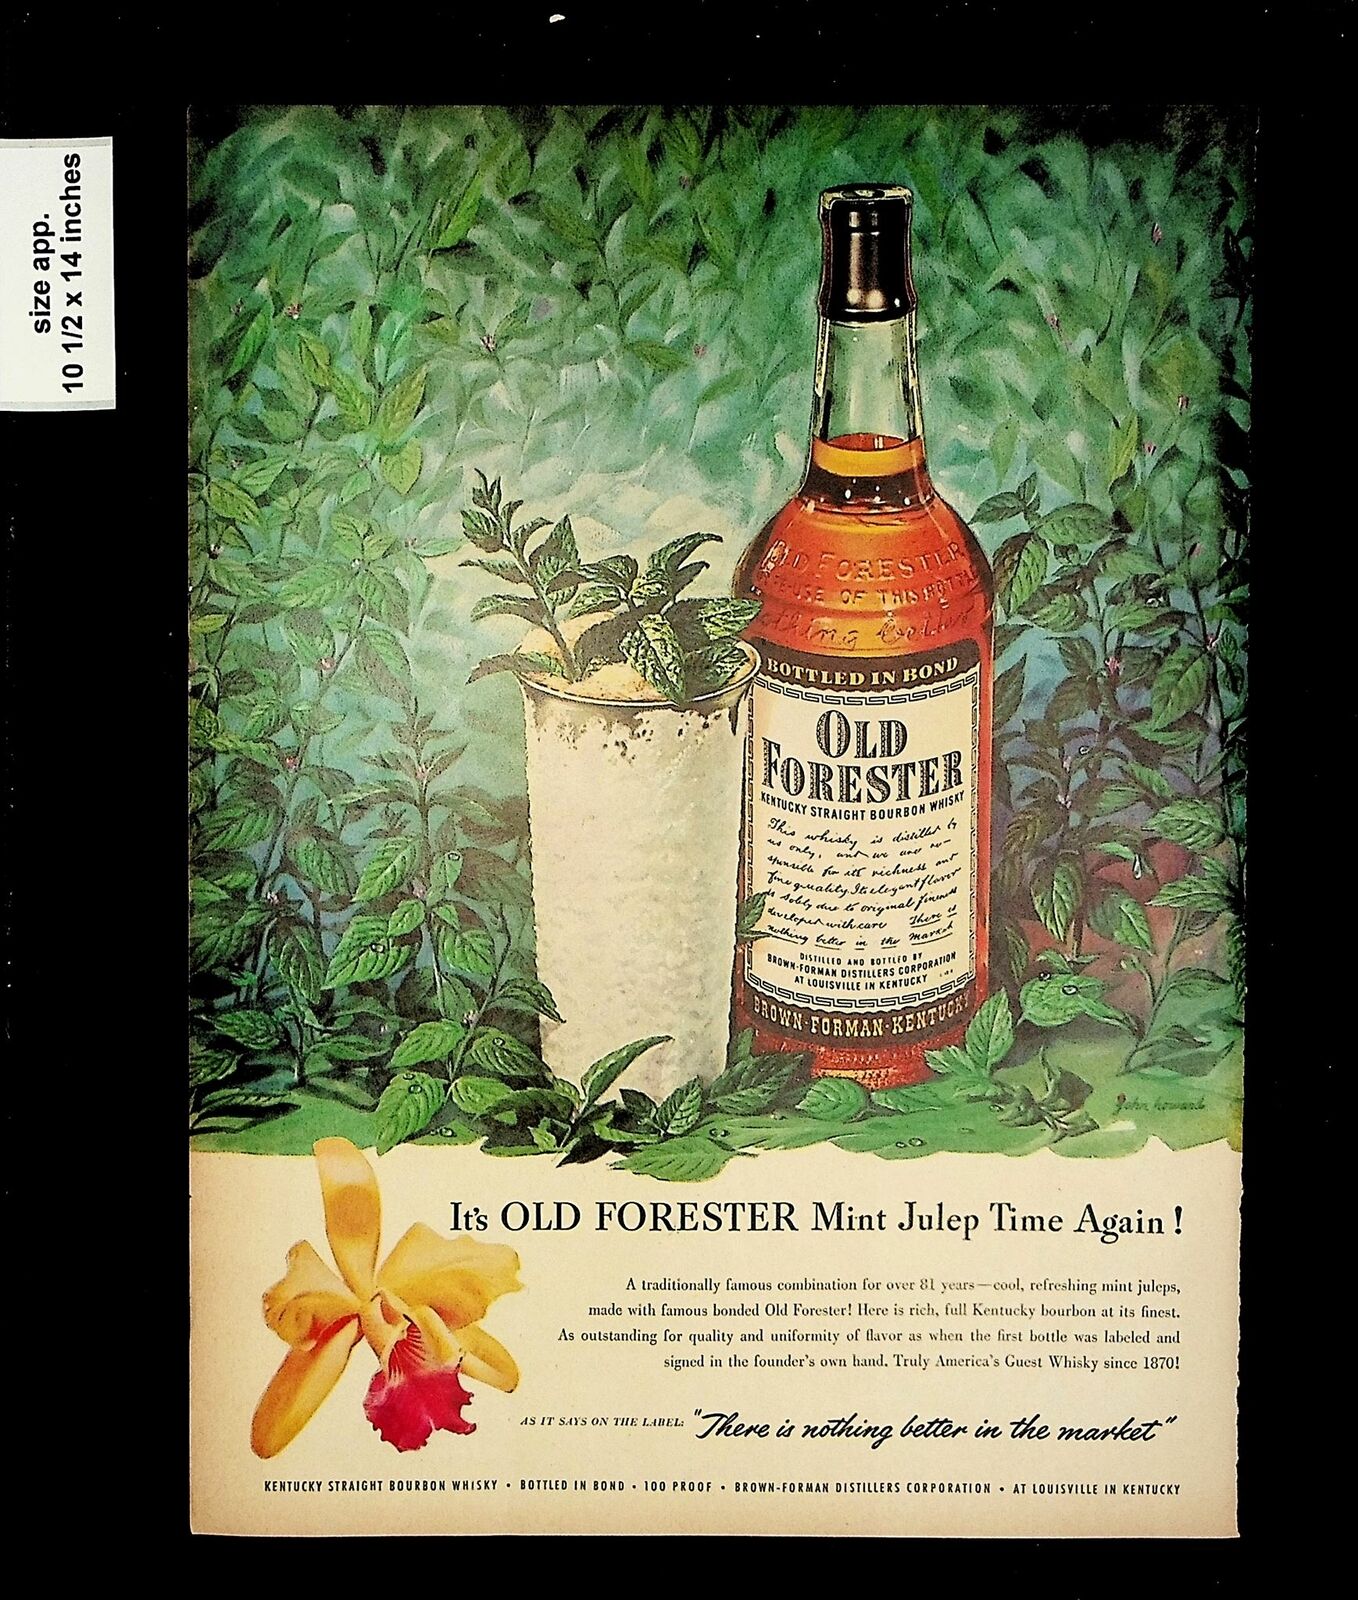 Vintage ad for Old Forester Bourbon Whiskey, May 1945, illustrated by John C Howard.